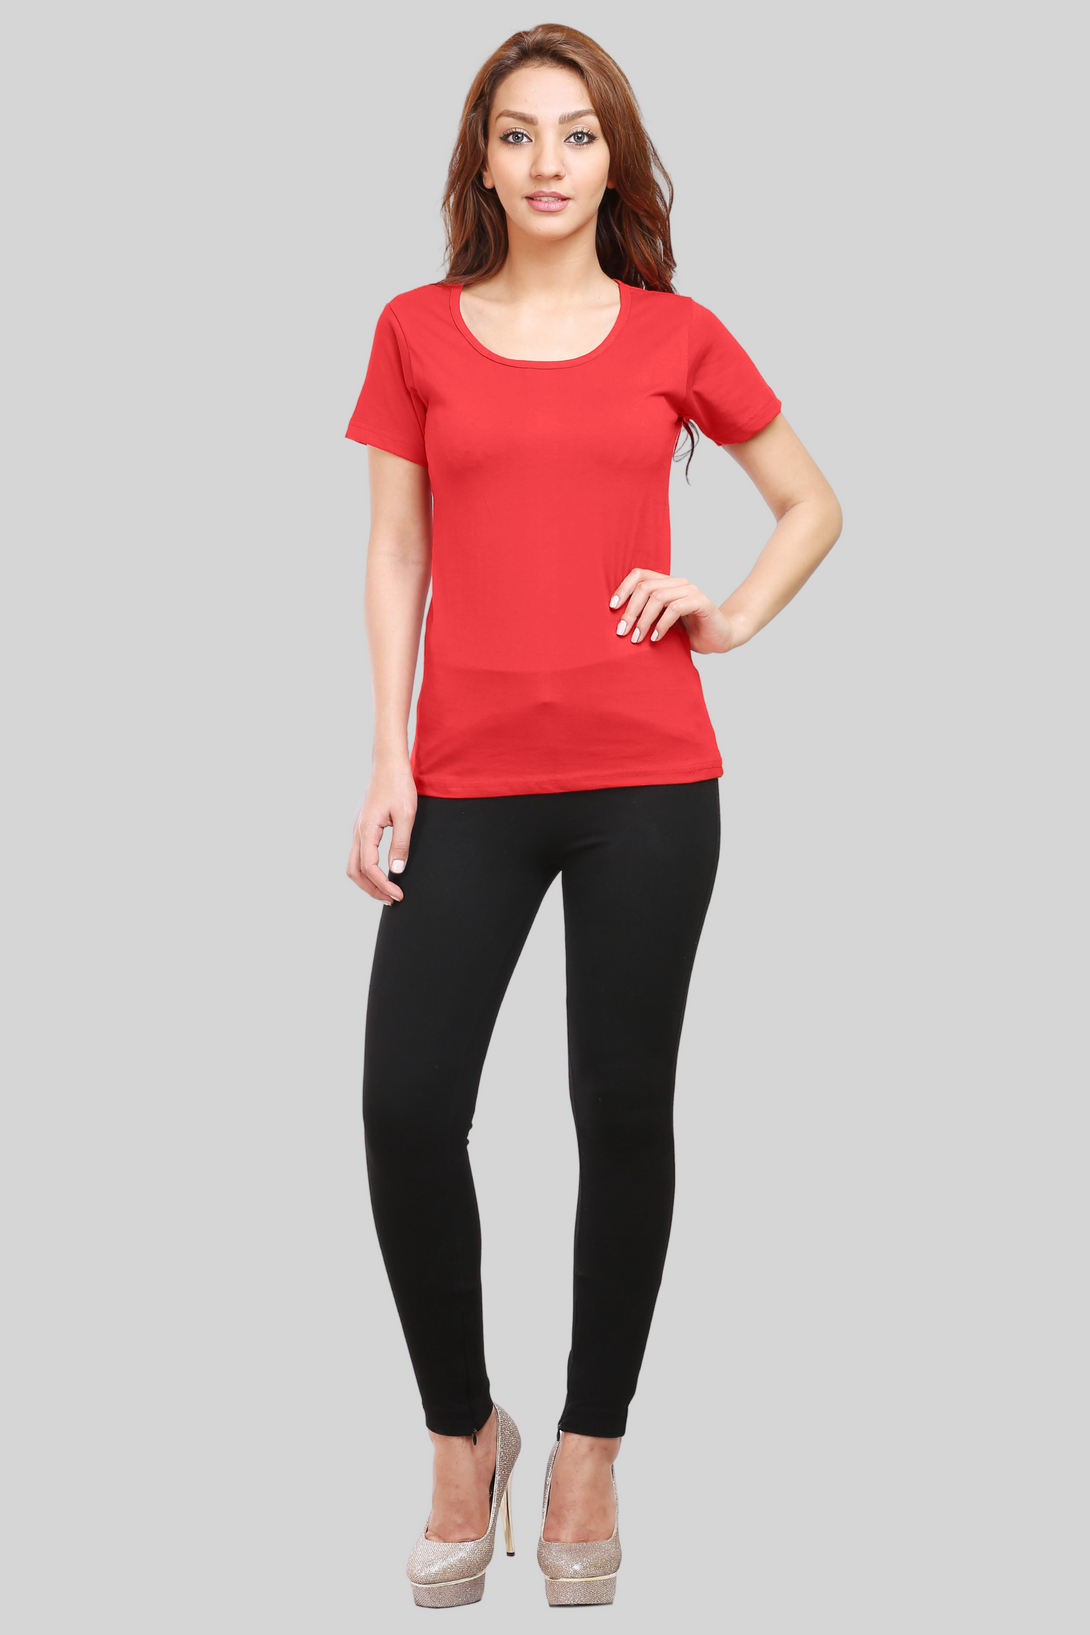 Red Scoop Neck T-Shirt For Women - WowWaves - 5